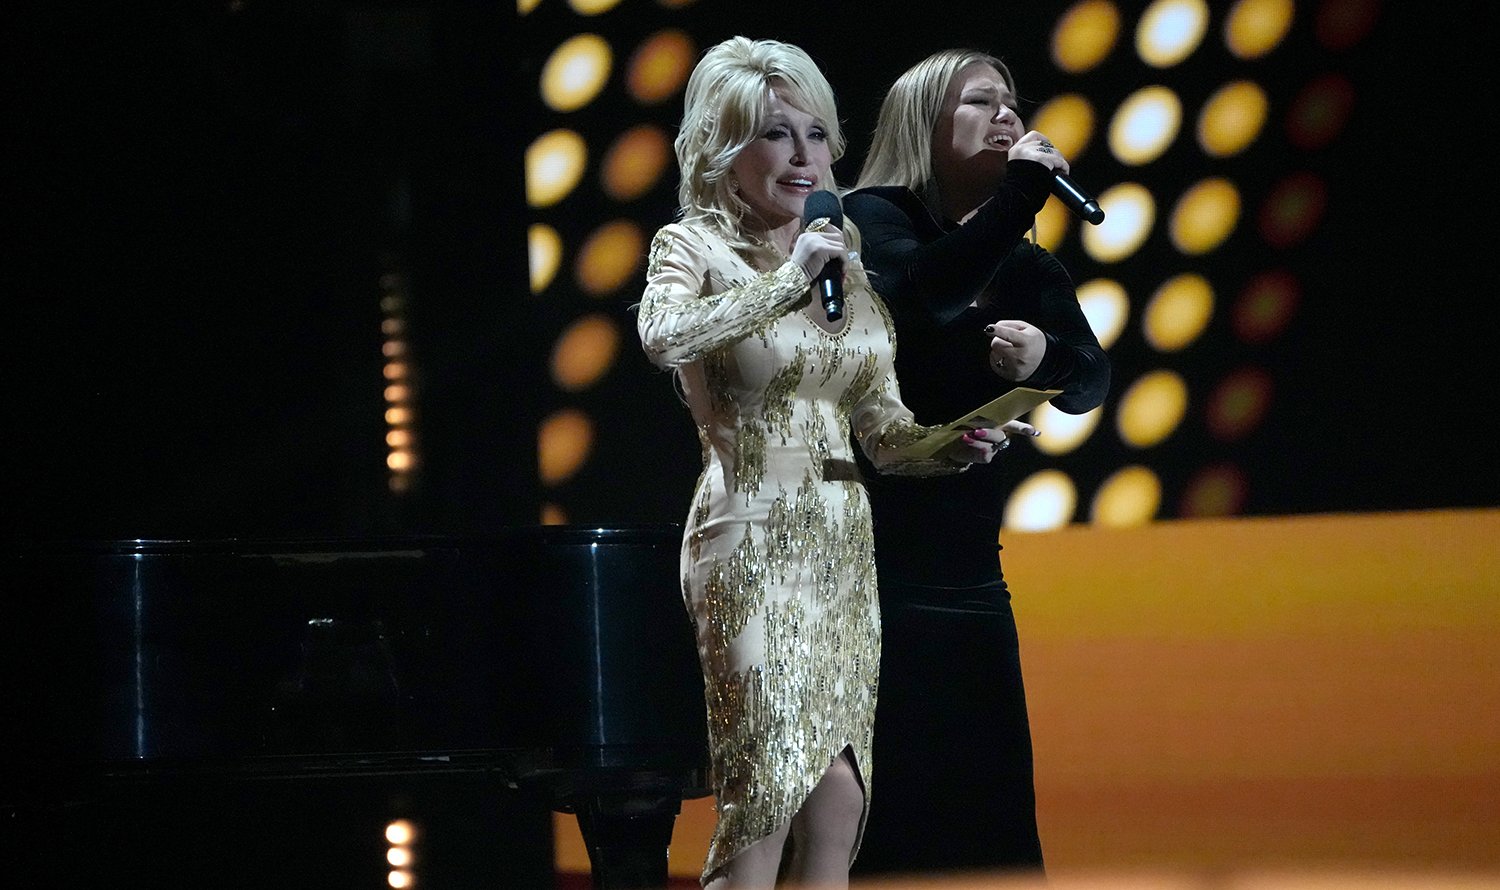 Dolly Parton and Kelly Clarkson, who have recorded a duet of Parton's 9 to 5, on stage together at the 57th Academy of Country Music Awards